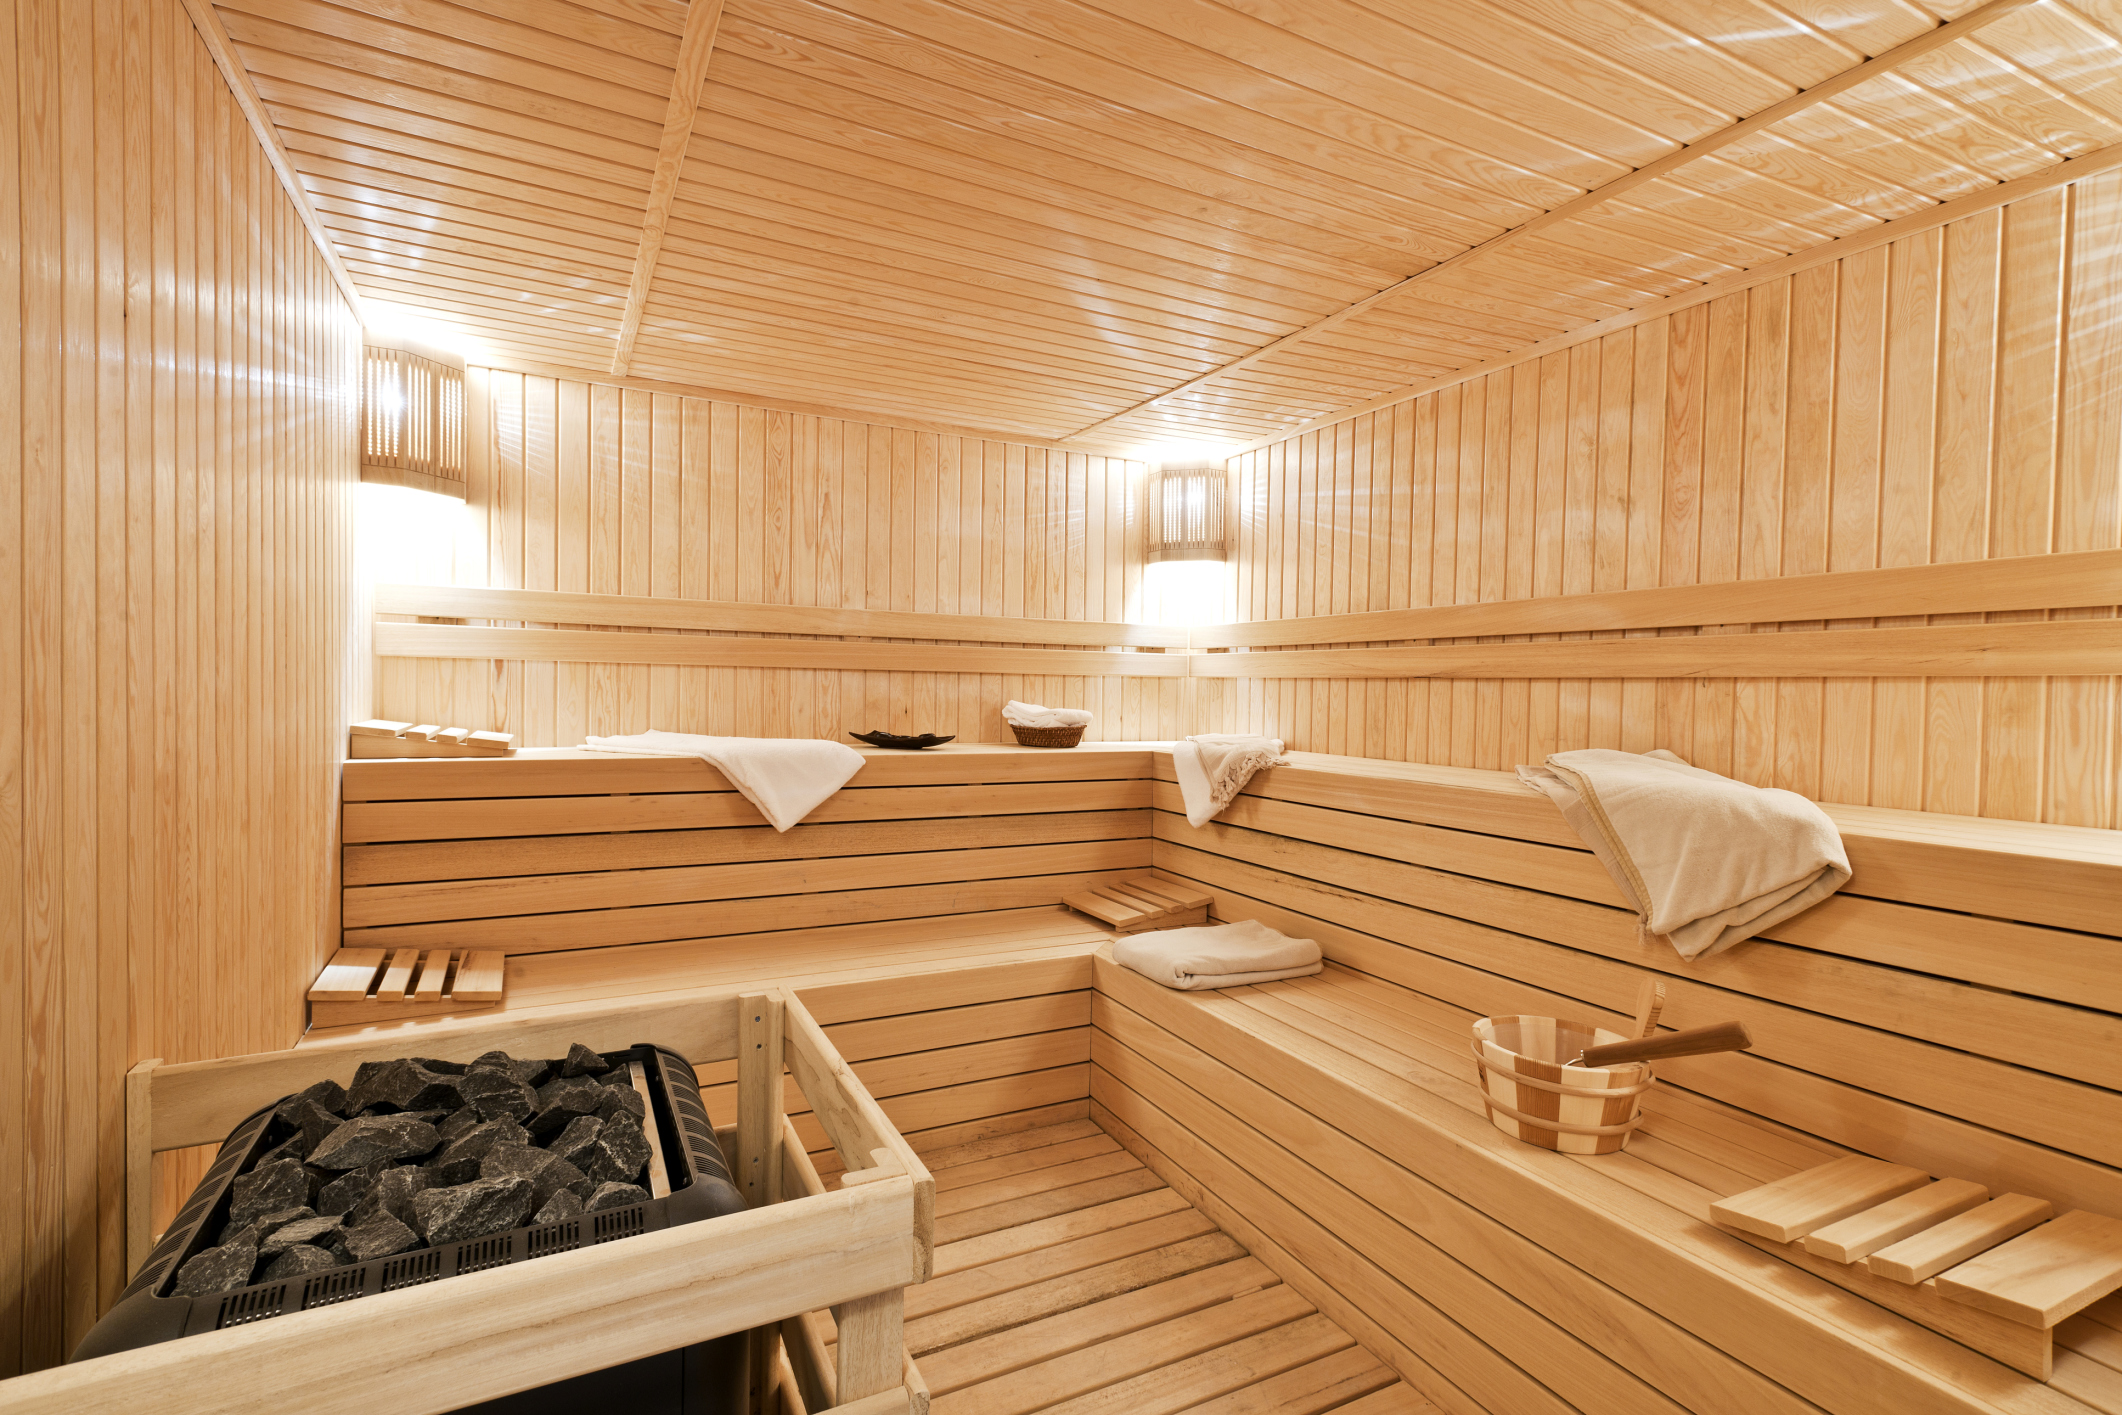 Saunas Are Not Just Hot Air Rooms. What Health Benefits Do They Have?